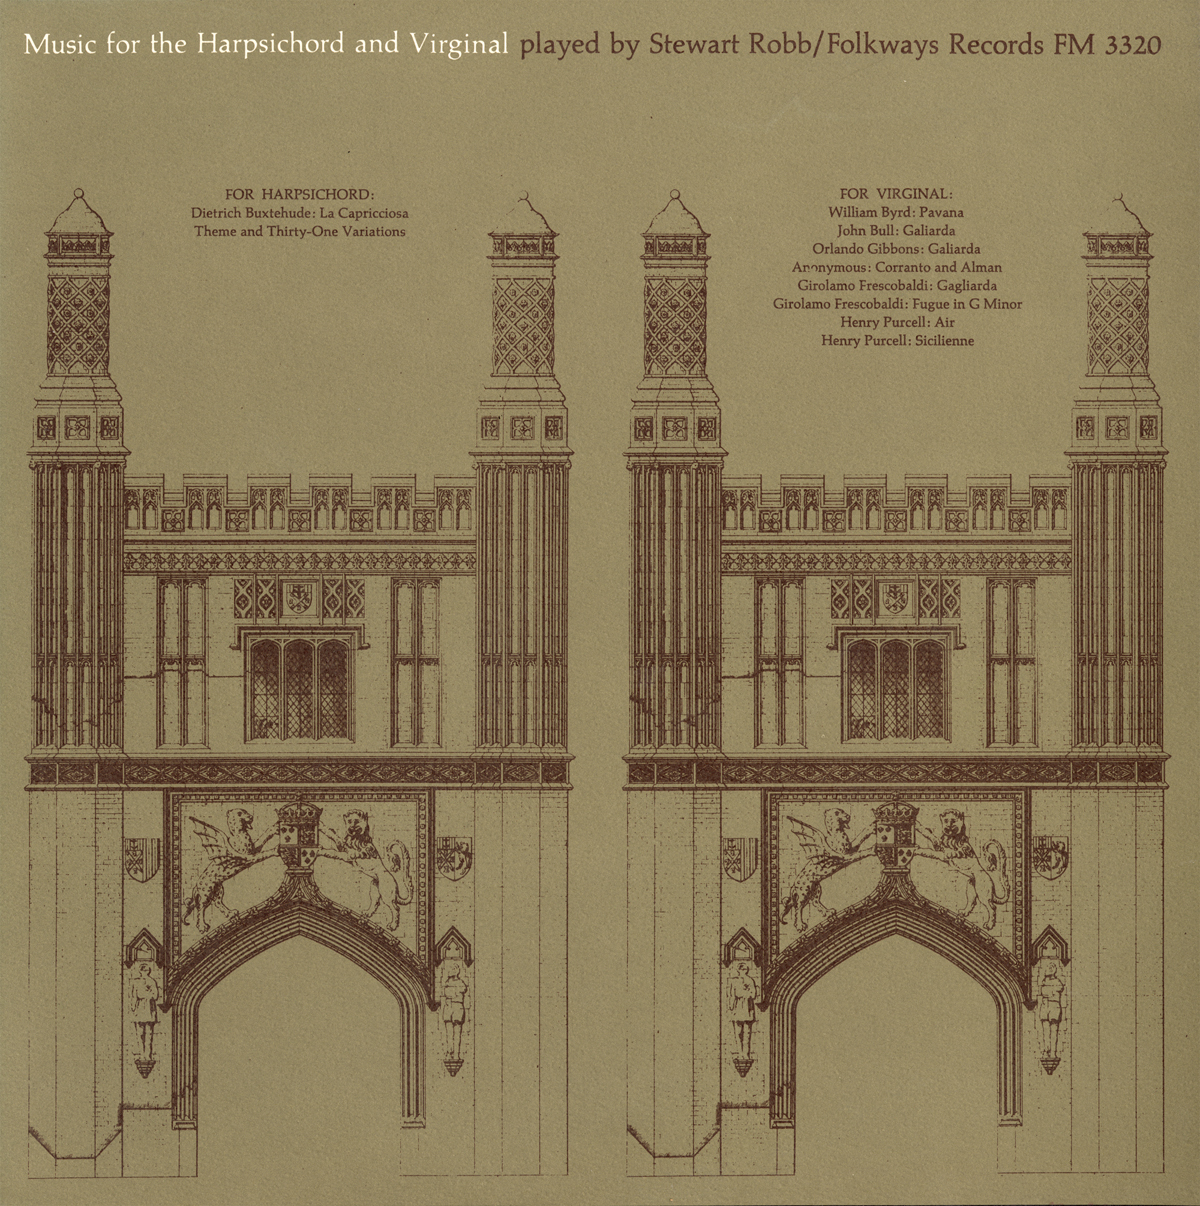 MUSIC FOR THE HARPSICHORD AND VIRGINAL